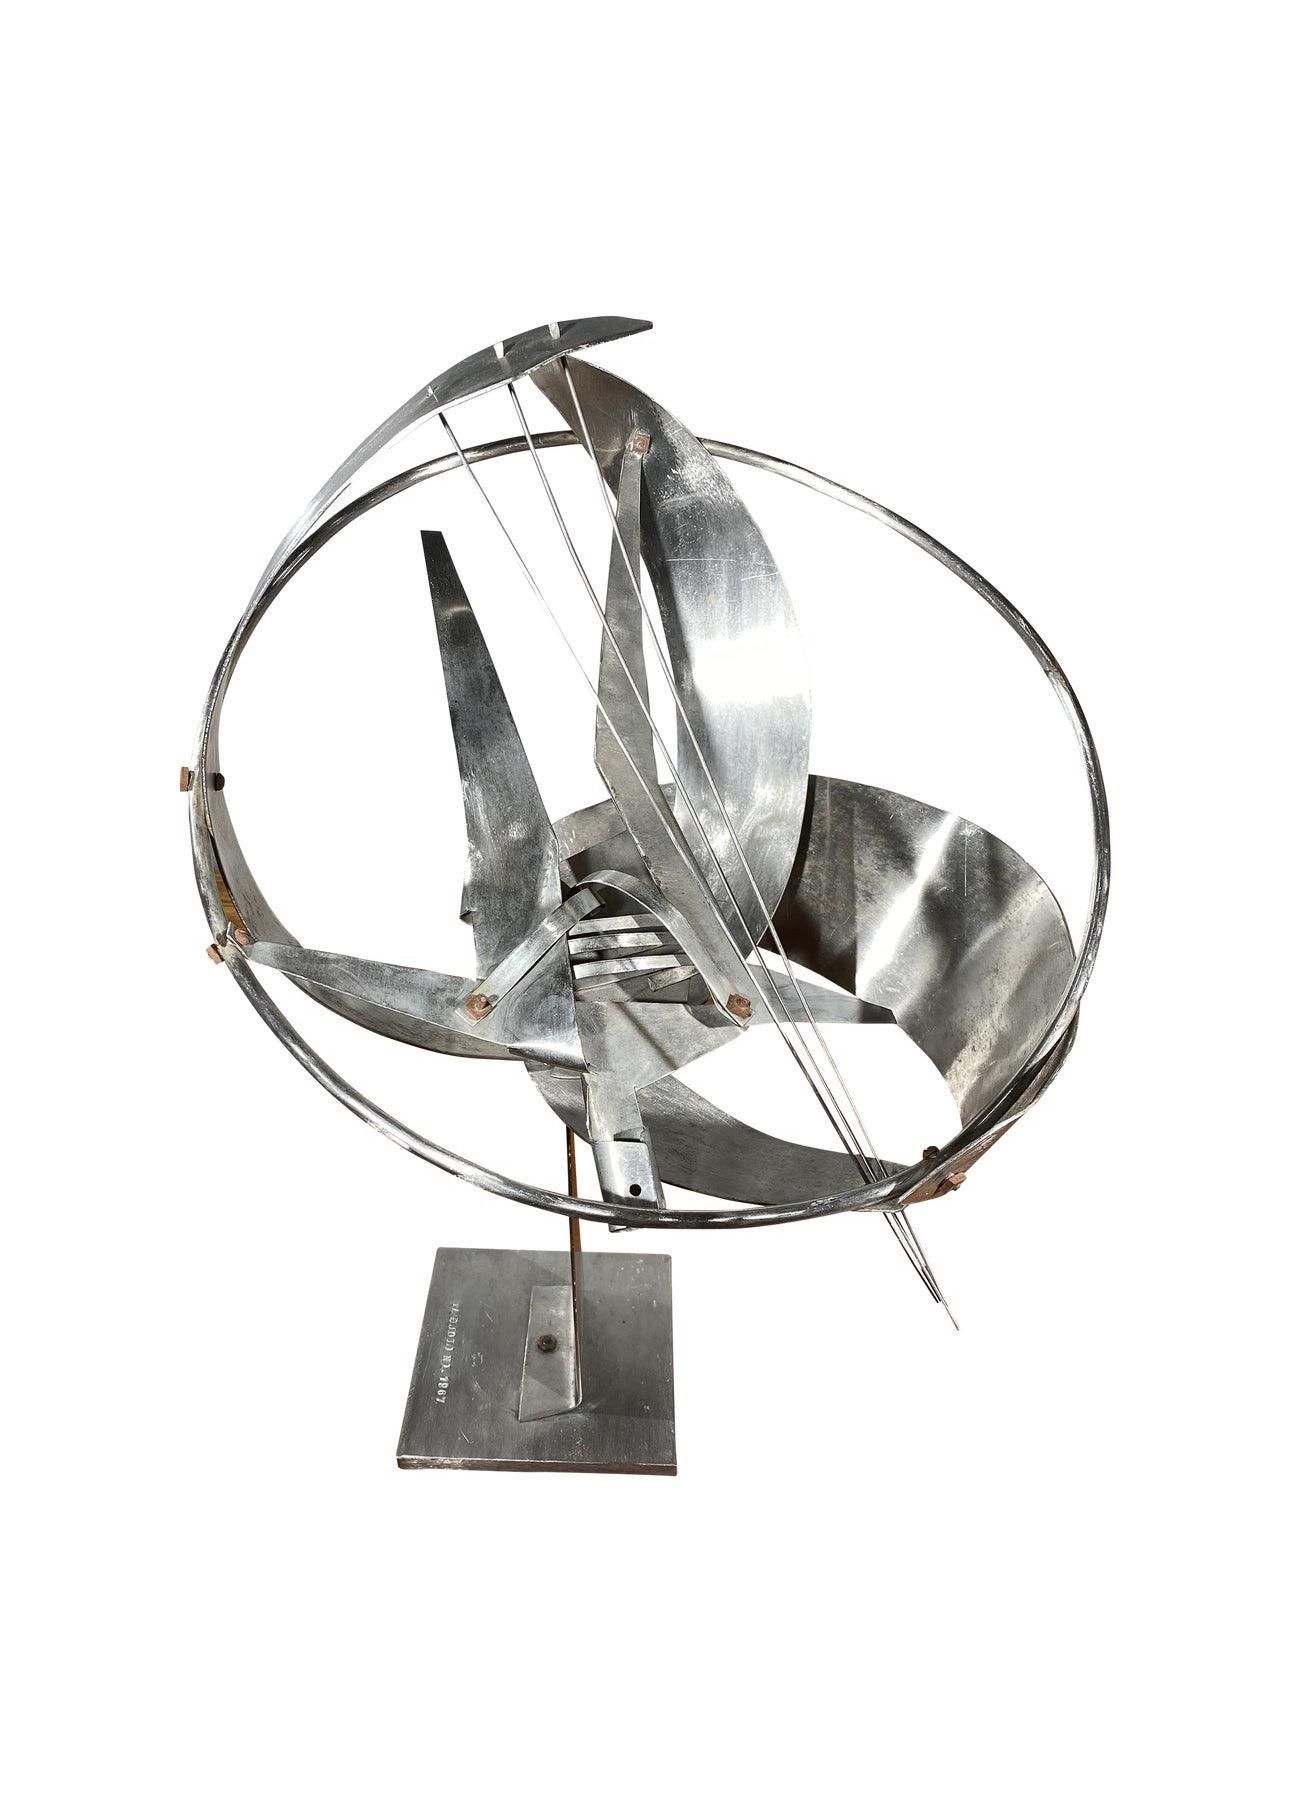 1967 Contemporary Alessandro Tagliolini Abstract Metal Sculpture For Sale 2